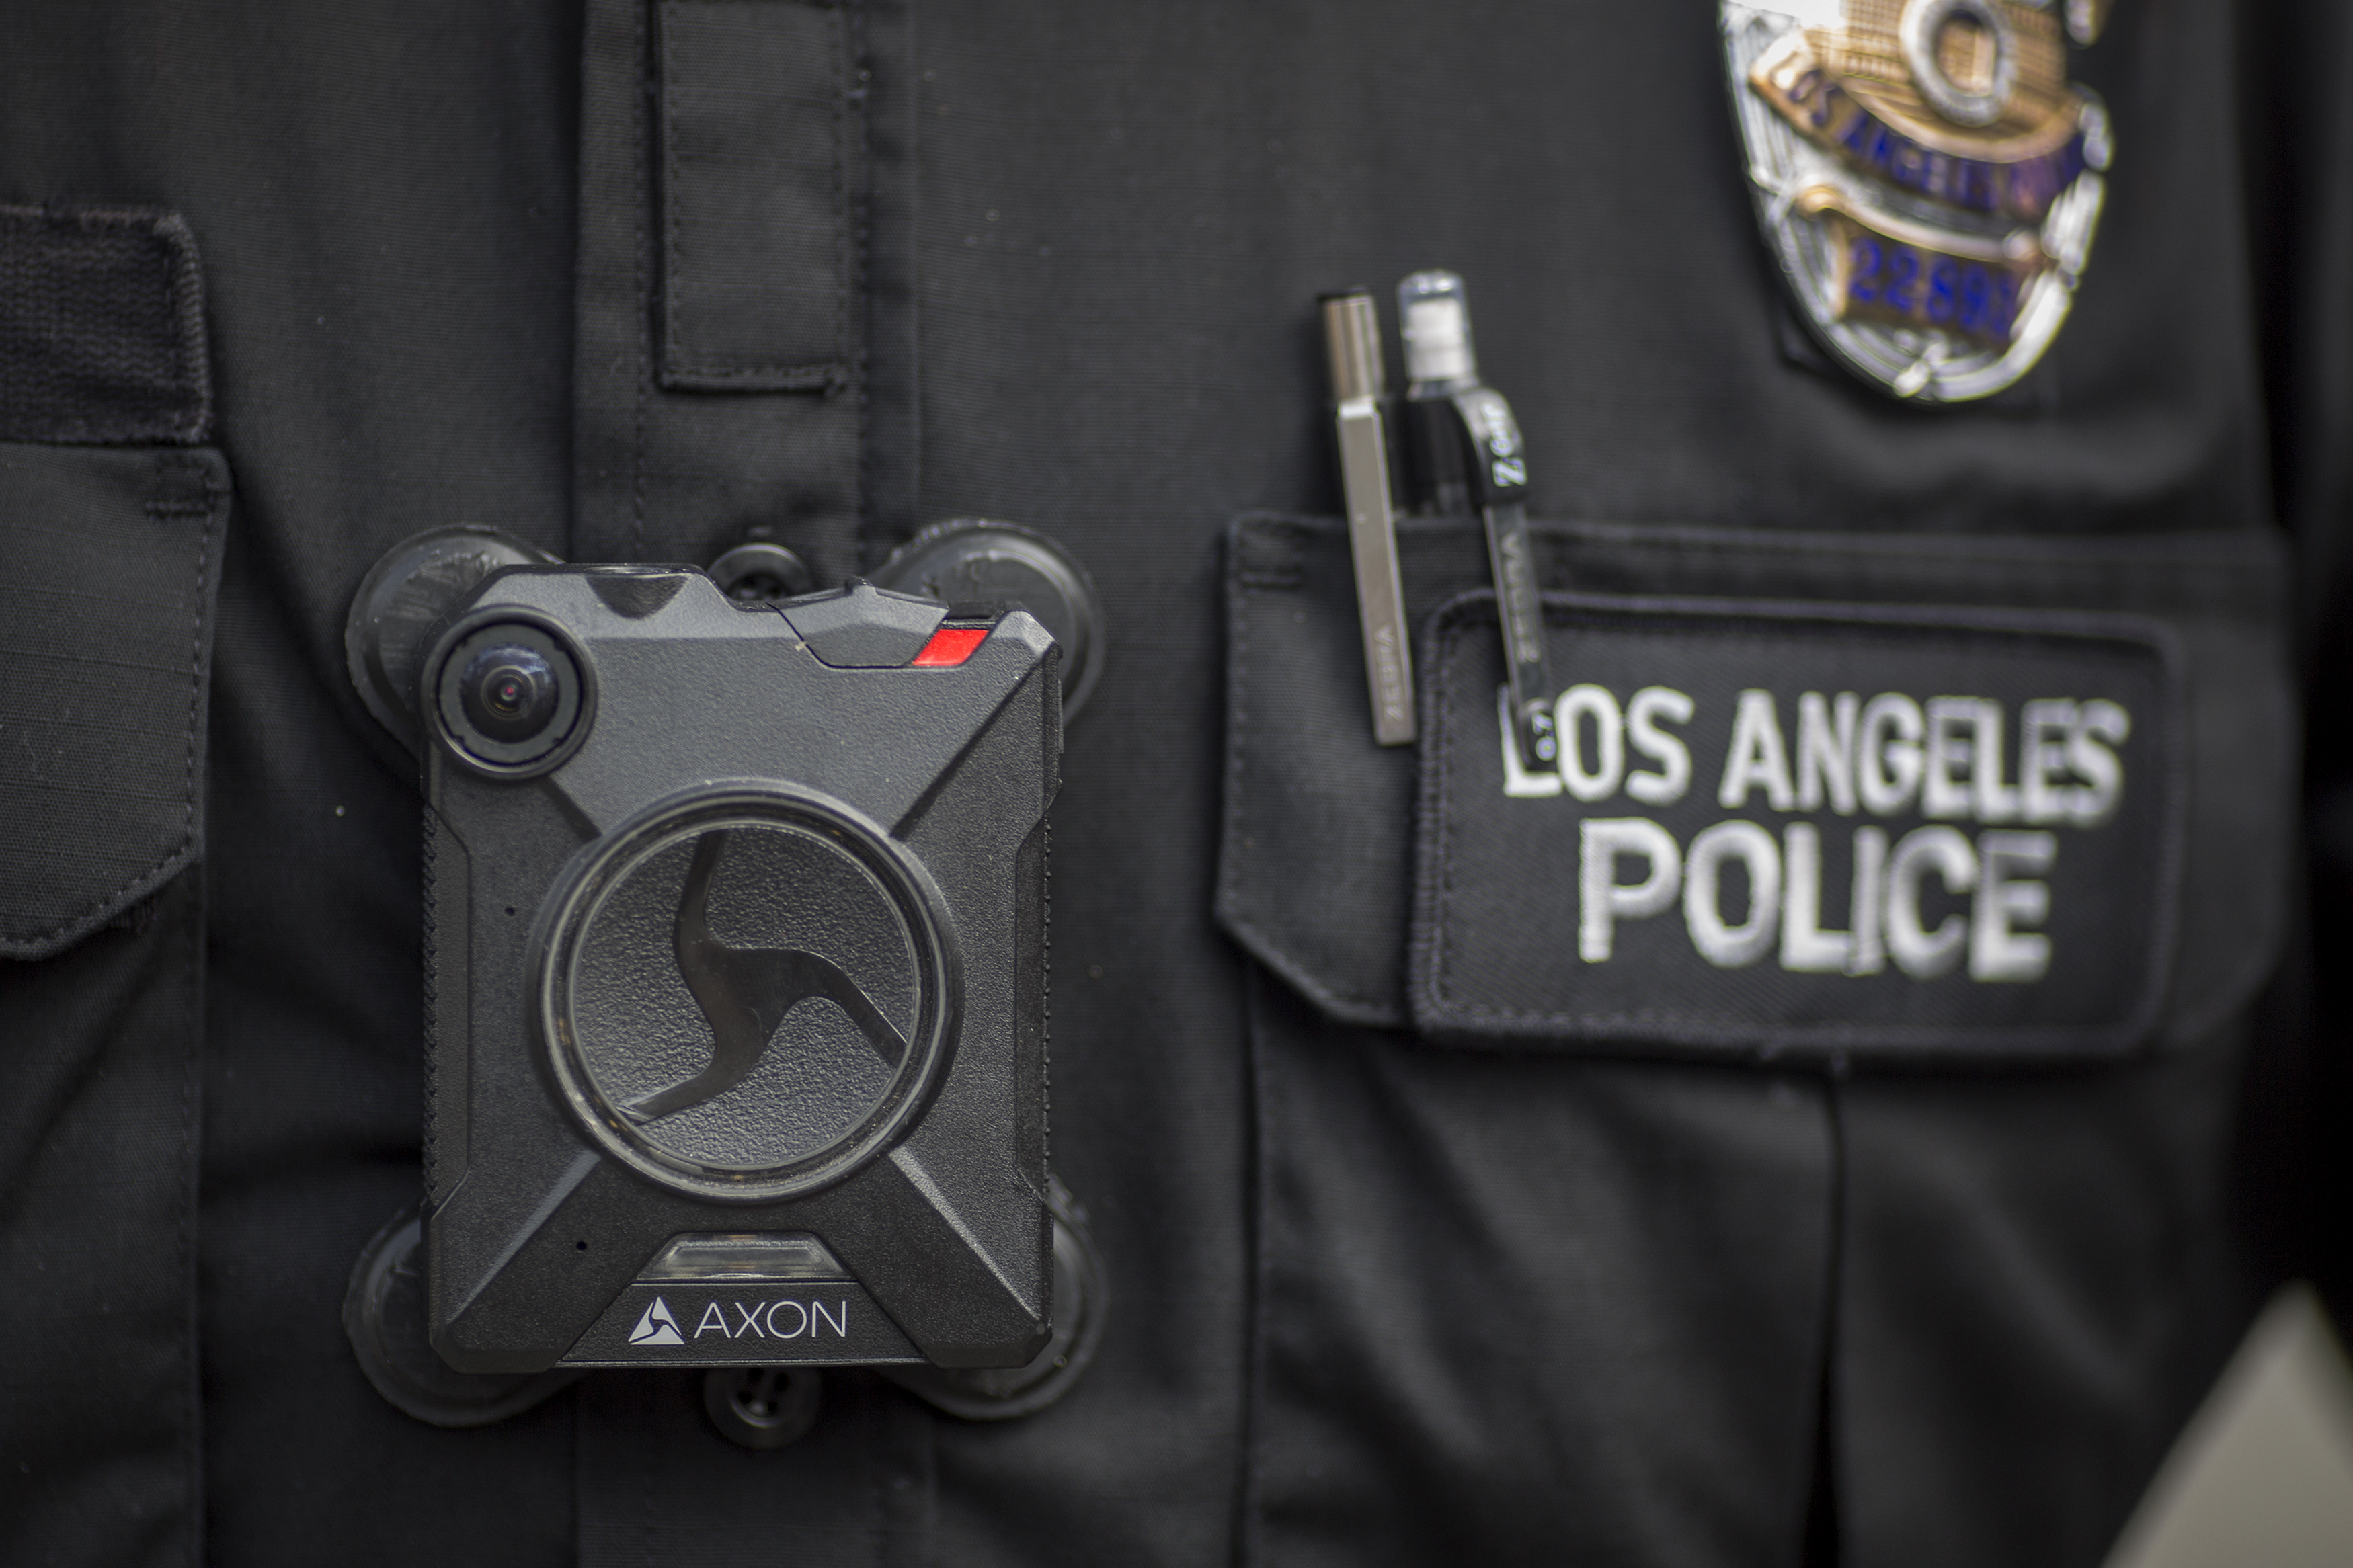 A Los Angeles police officer wear an AXON body camera on February 18, 2017. (David McNew—Getty Images)